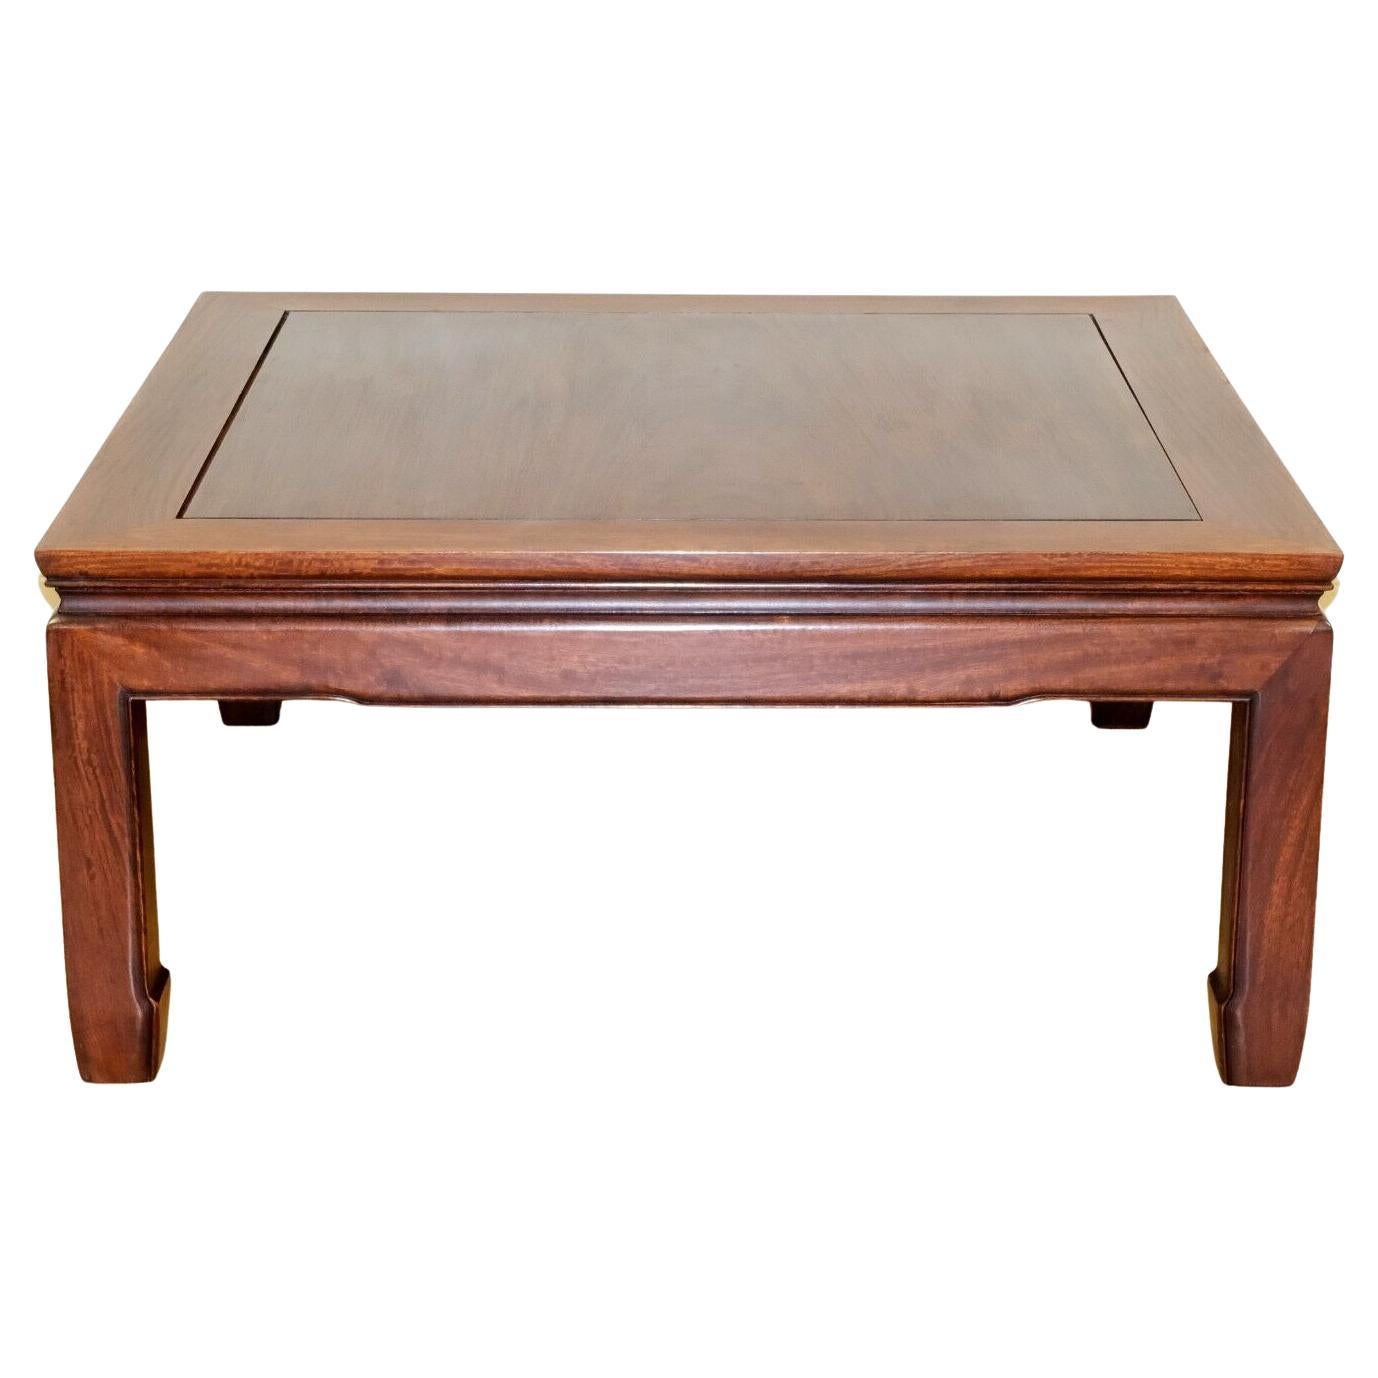 CHARMING 20TH CENTURY HARDWOOD MiNG STYLE CHiNESE COFFEE TABLE ON HOOF FEET For Sale